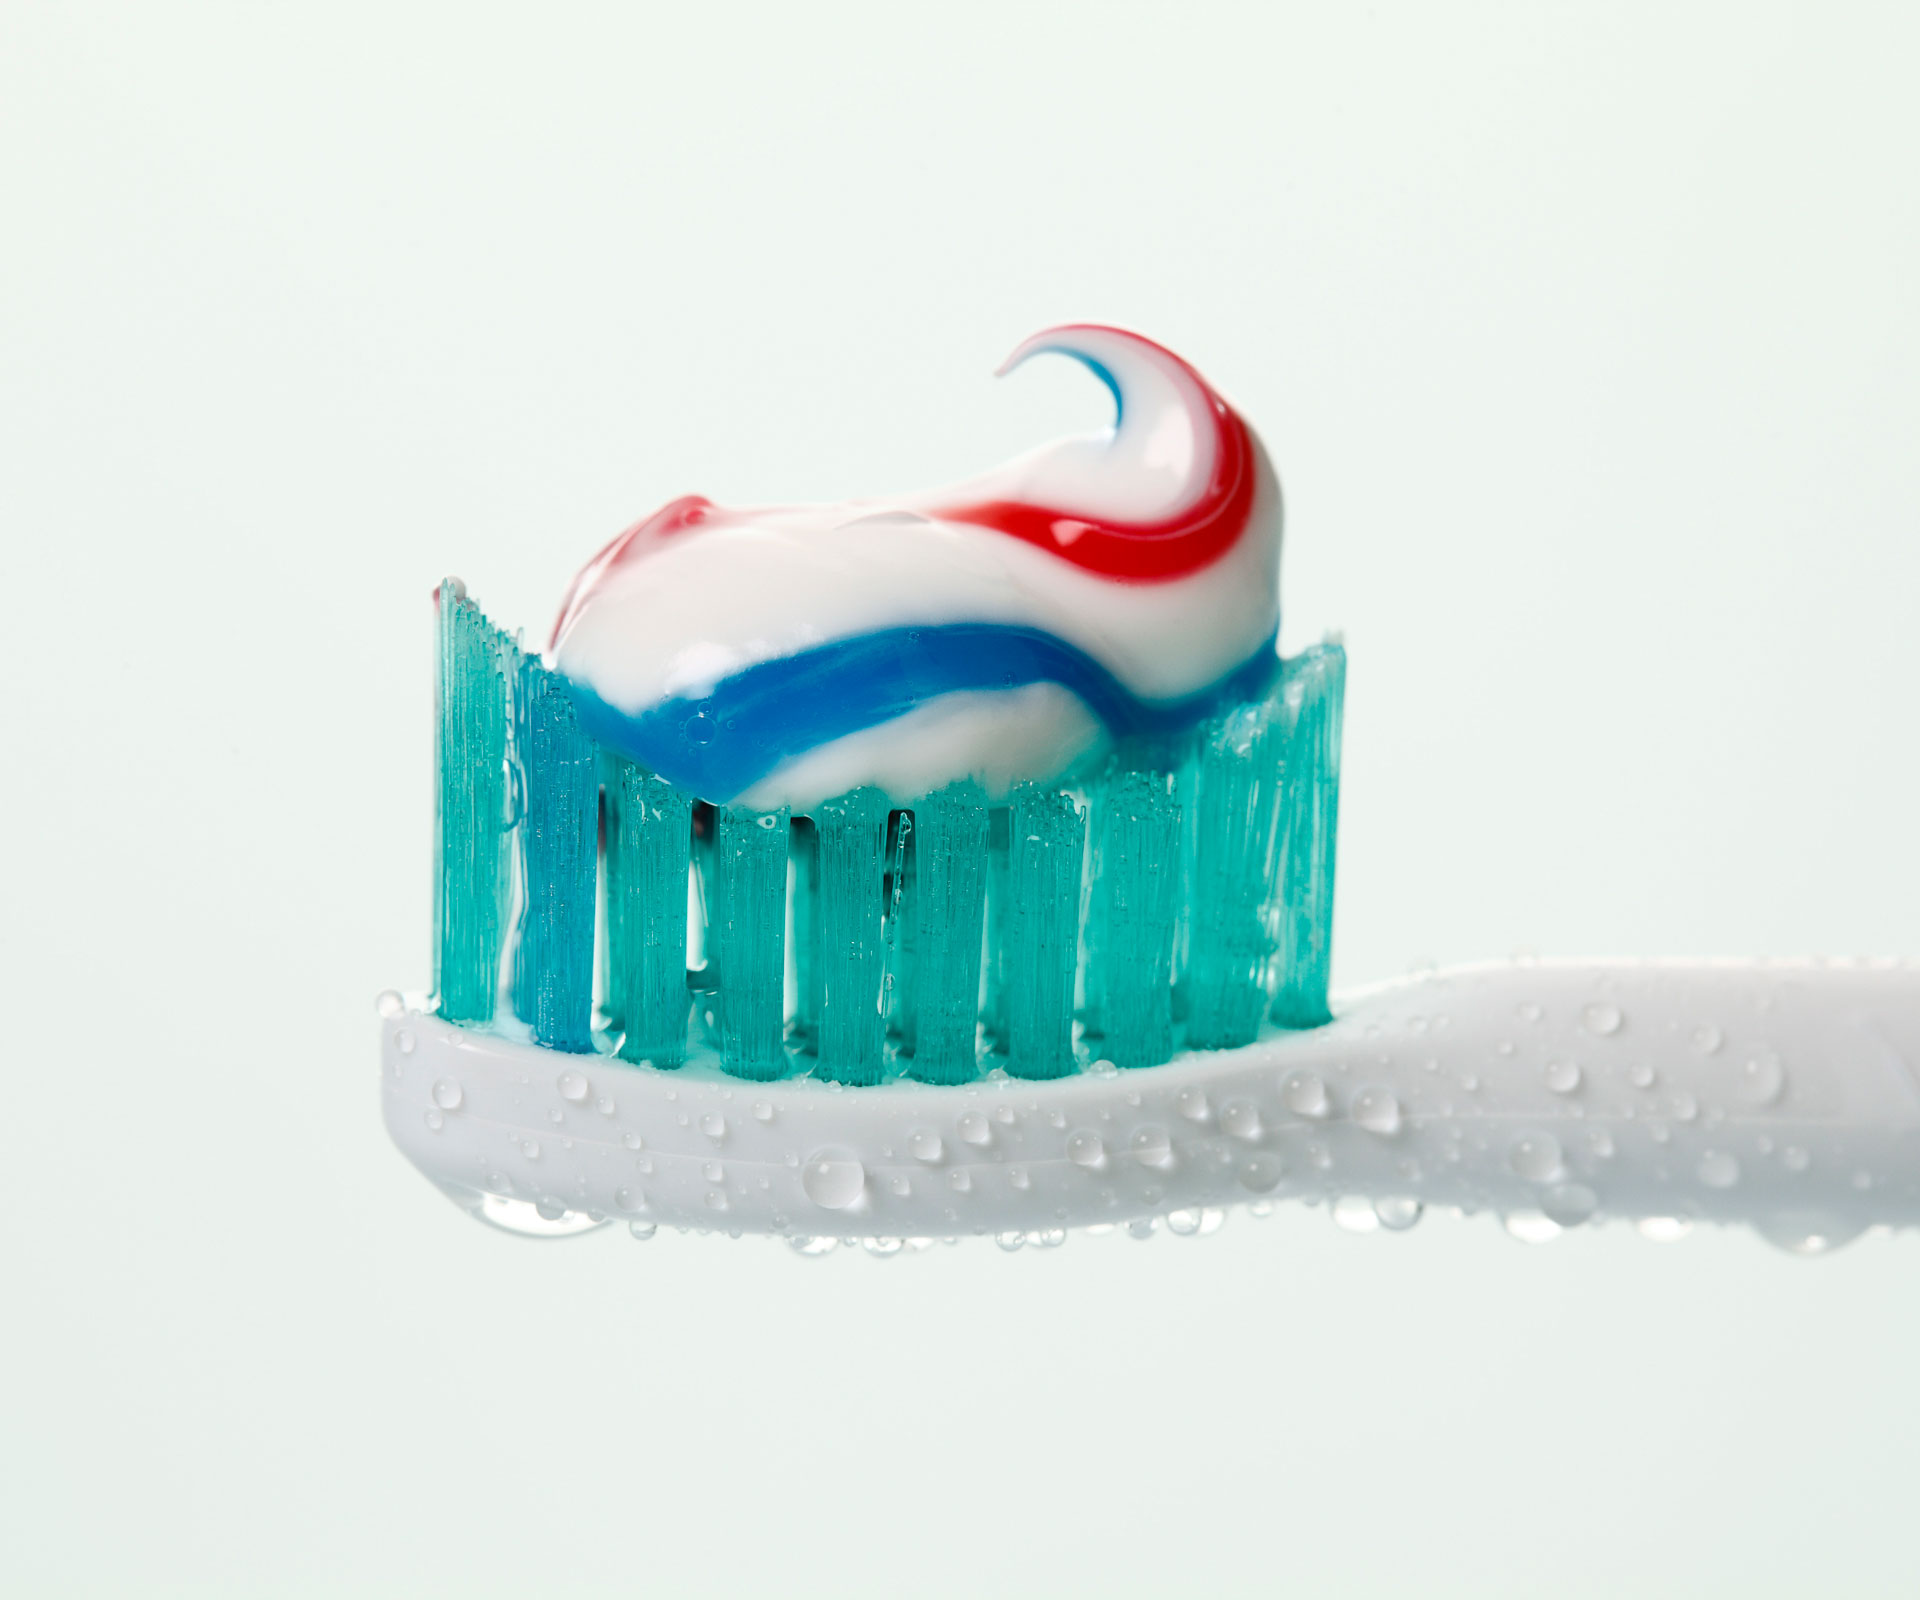 10 unusual uses for toothpaste you’d never have expected